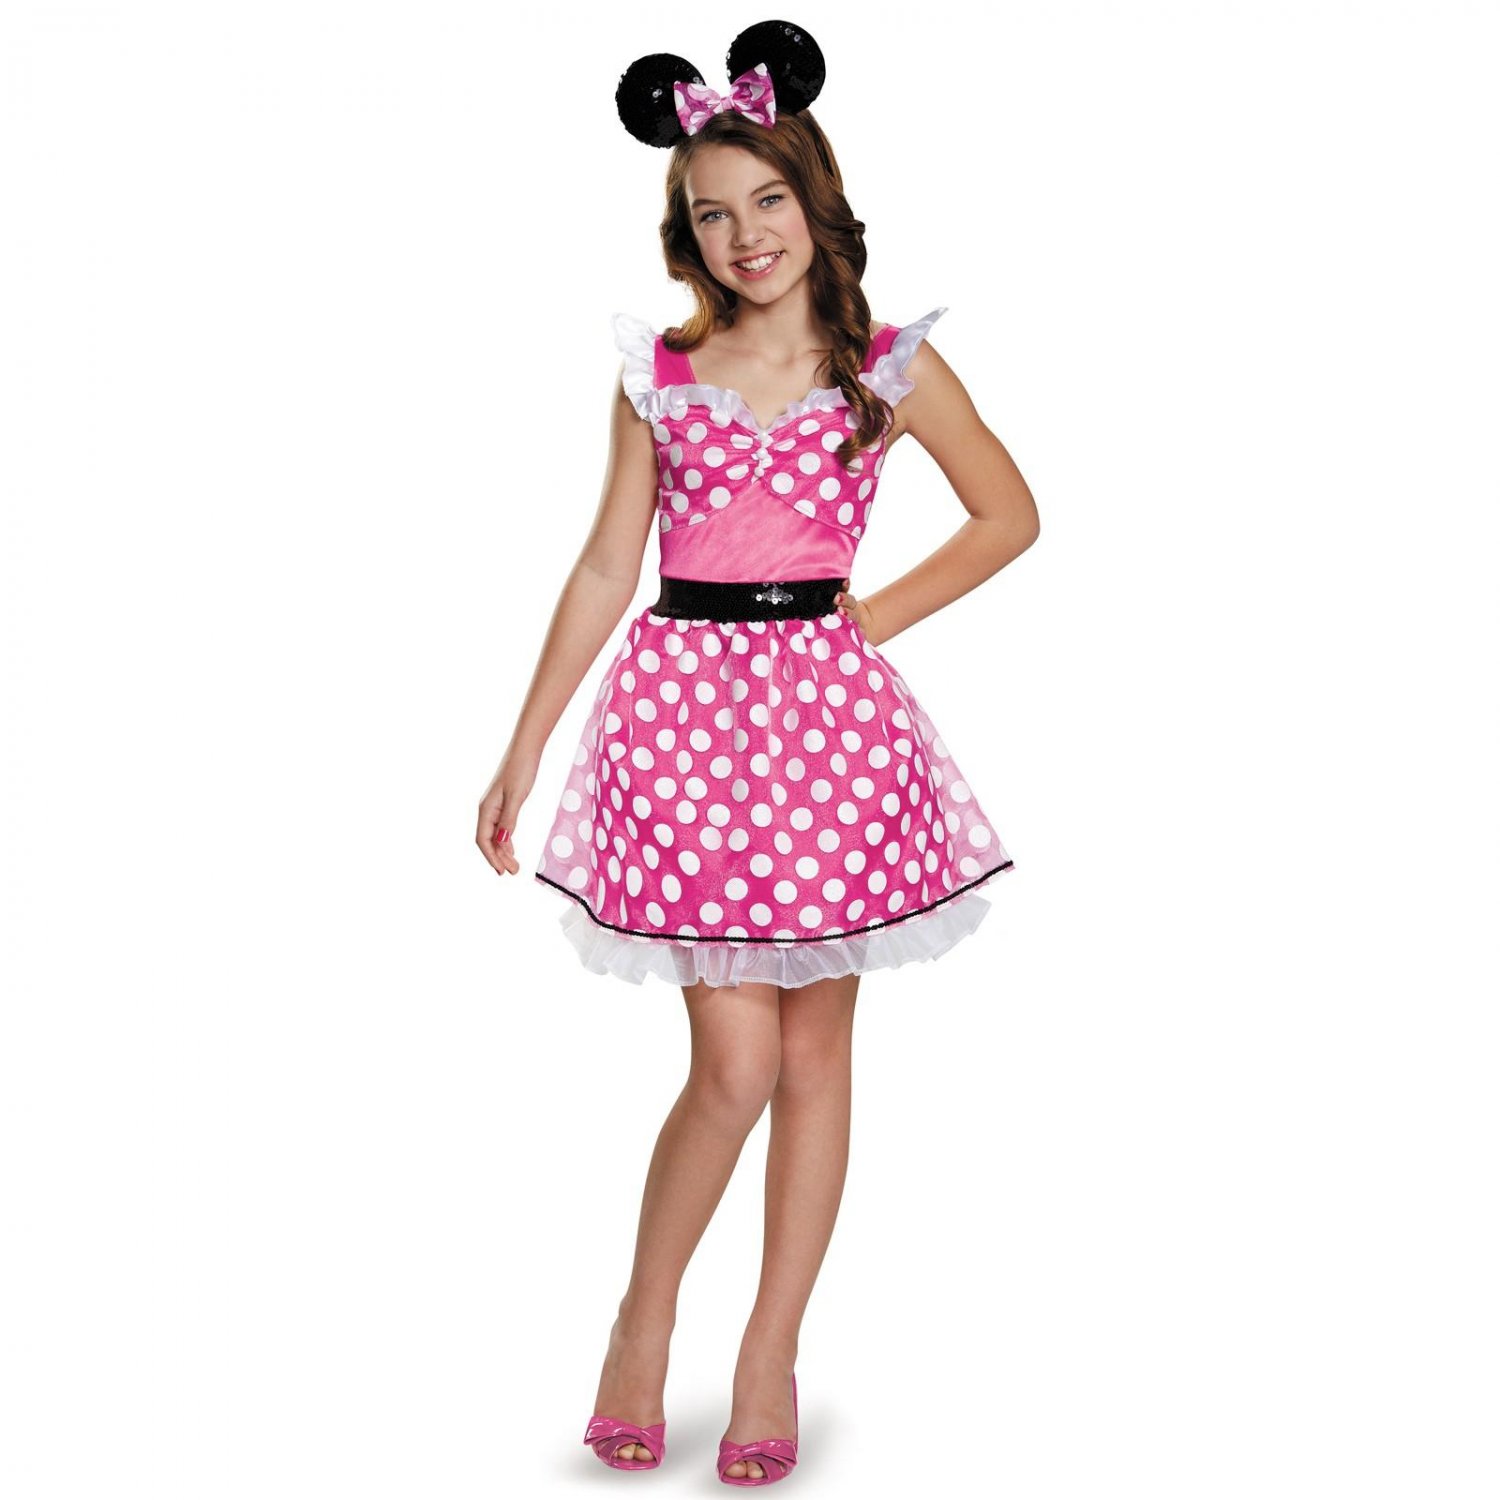 Clothing & Shoes, Kid's Clothing, Costumes, Children Costumes, Dis...